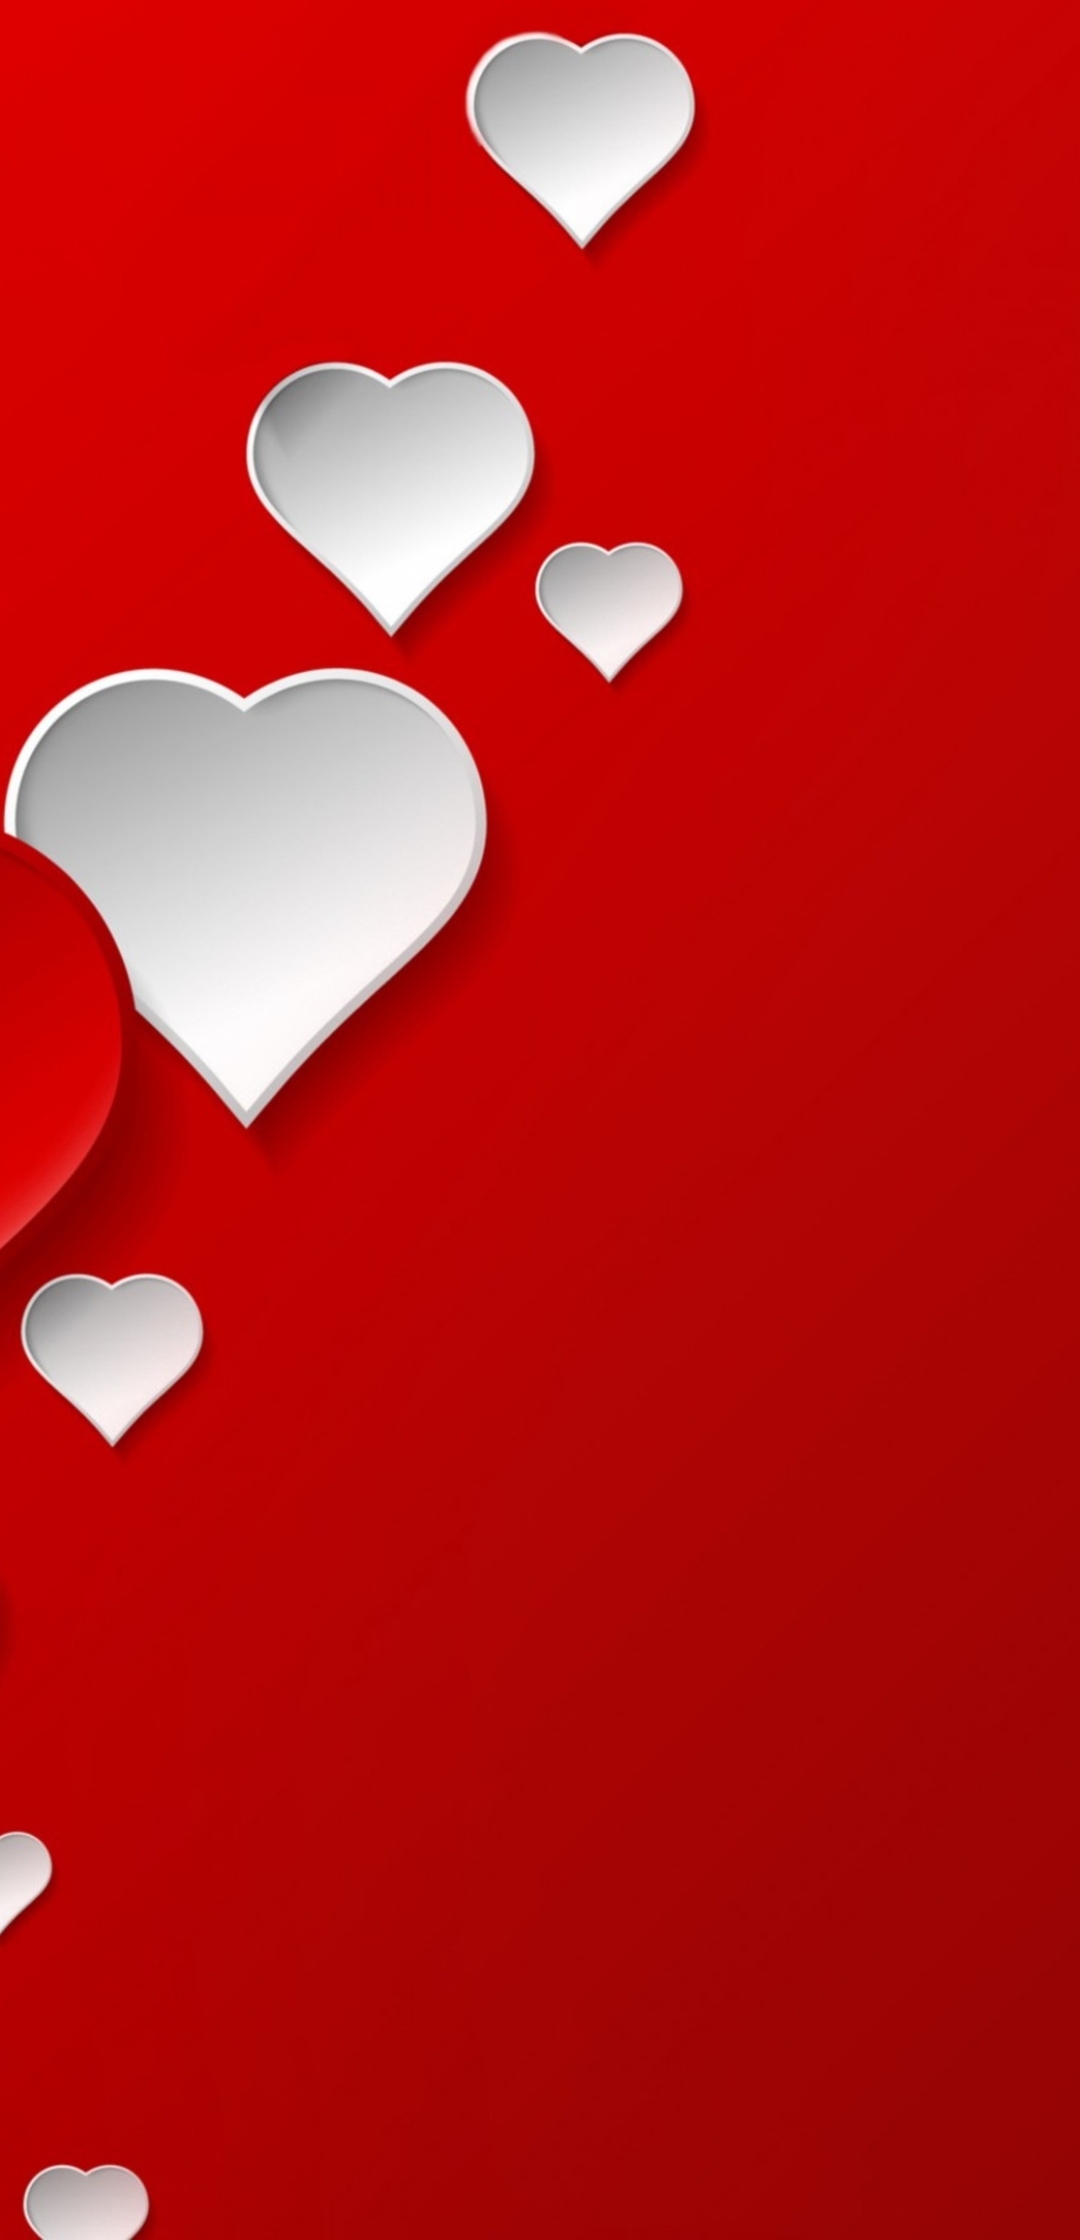 Image: Hearts, red, white, red background, love